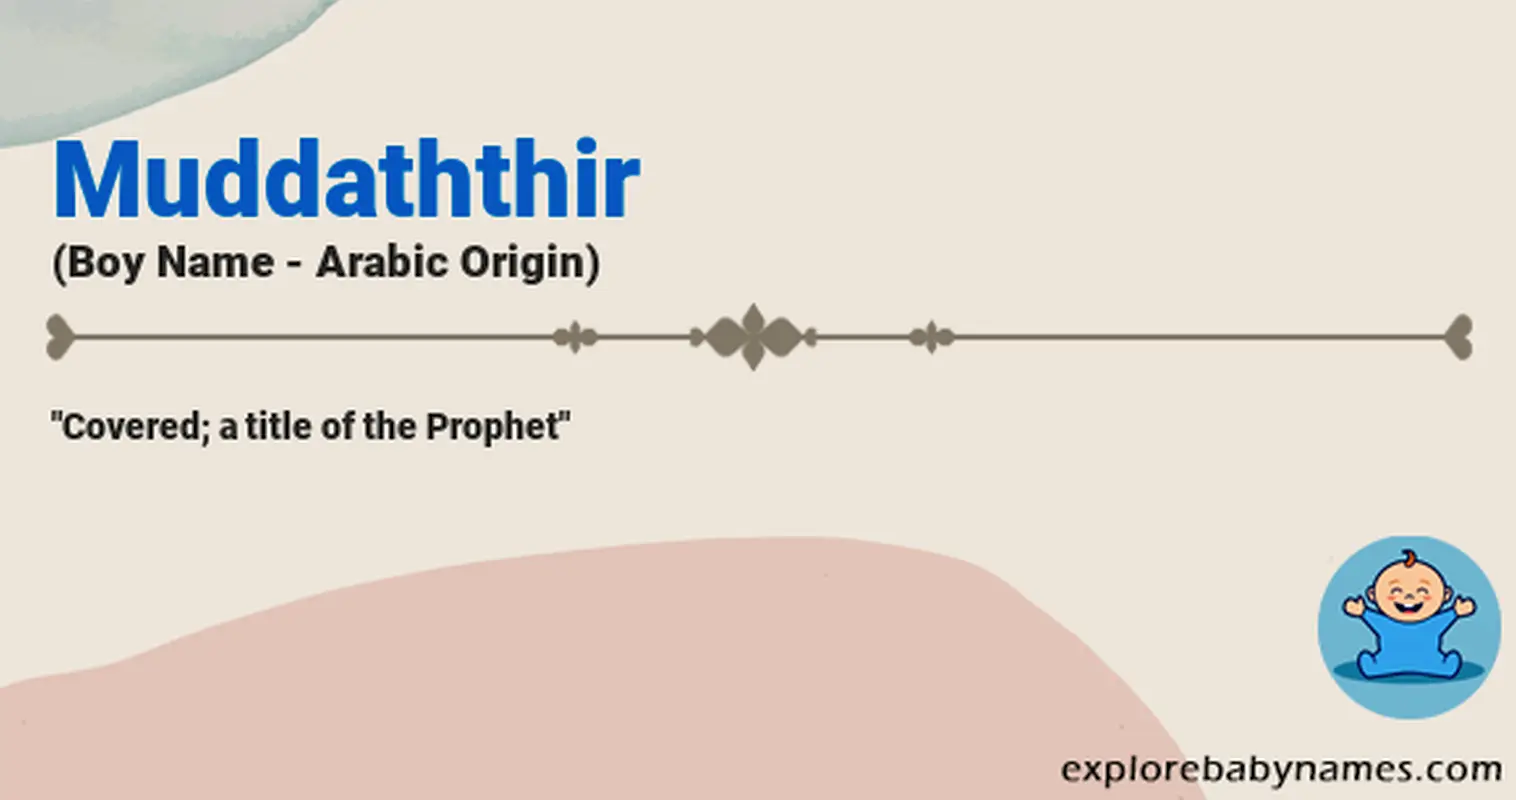 Meaning of Muddaththir